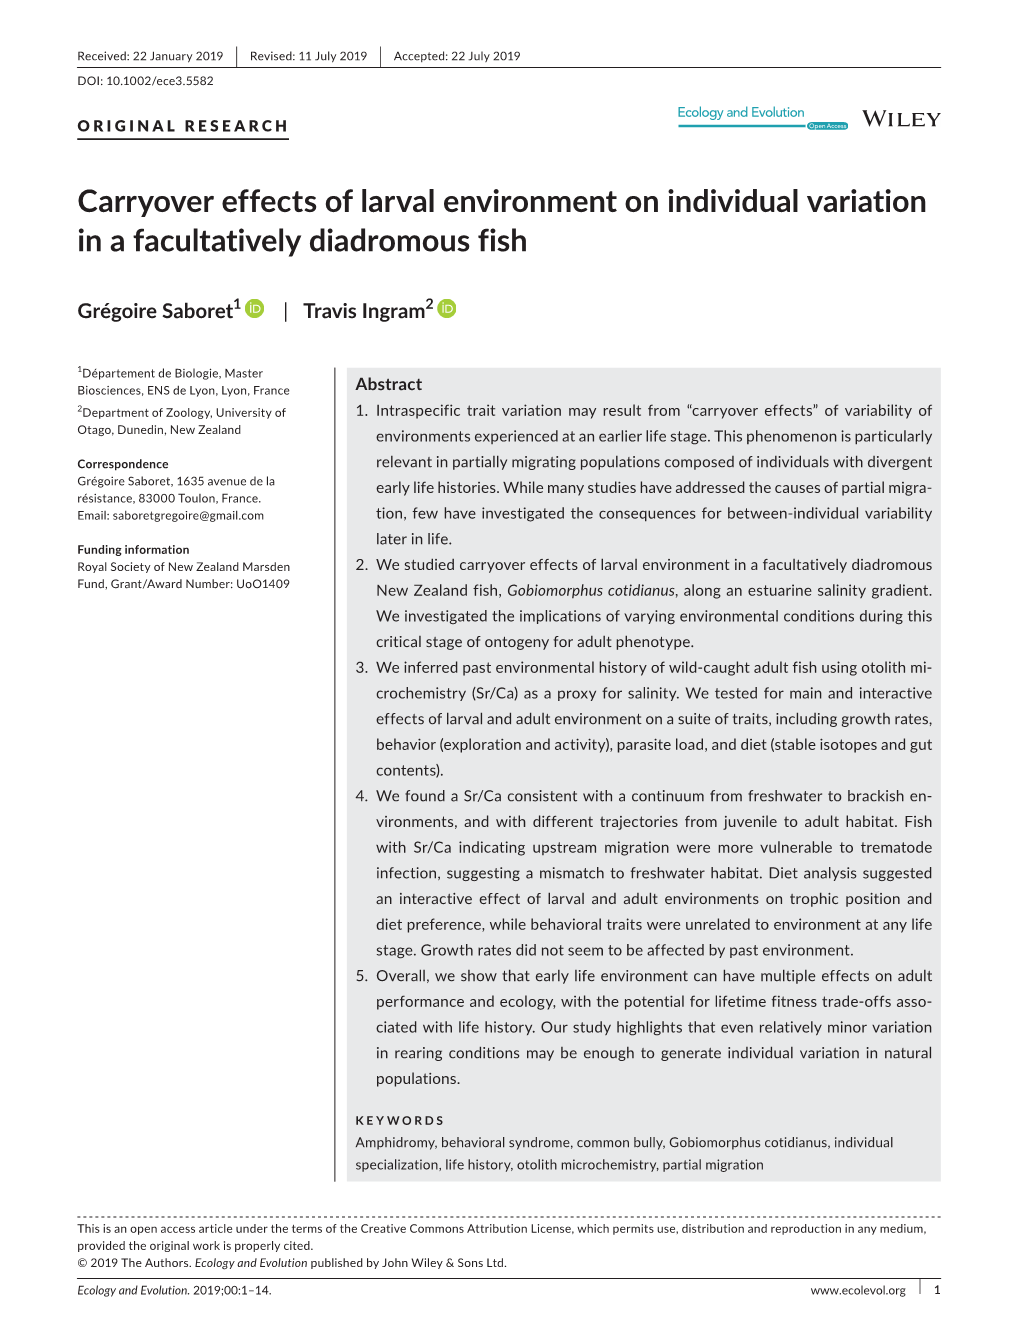 Carryover Effects of Larval Environment on Individual Variation in a Facultatively Diadromous Fish